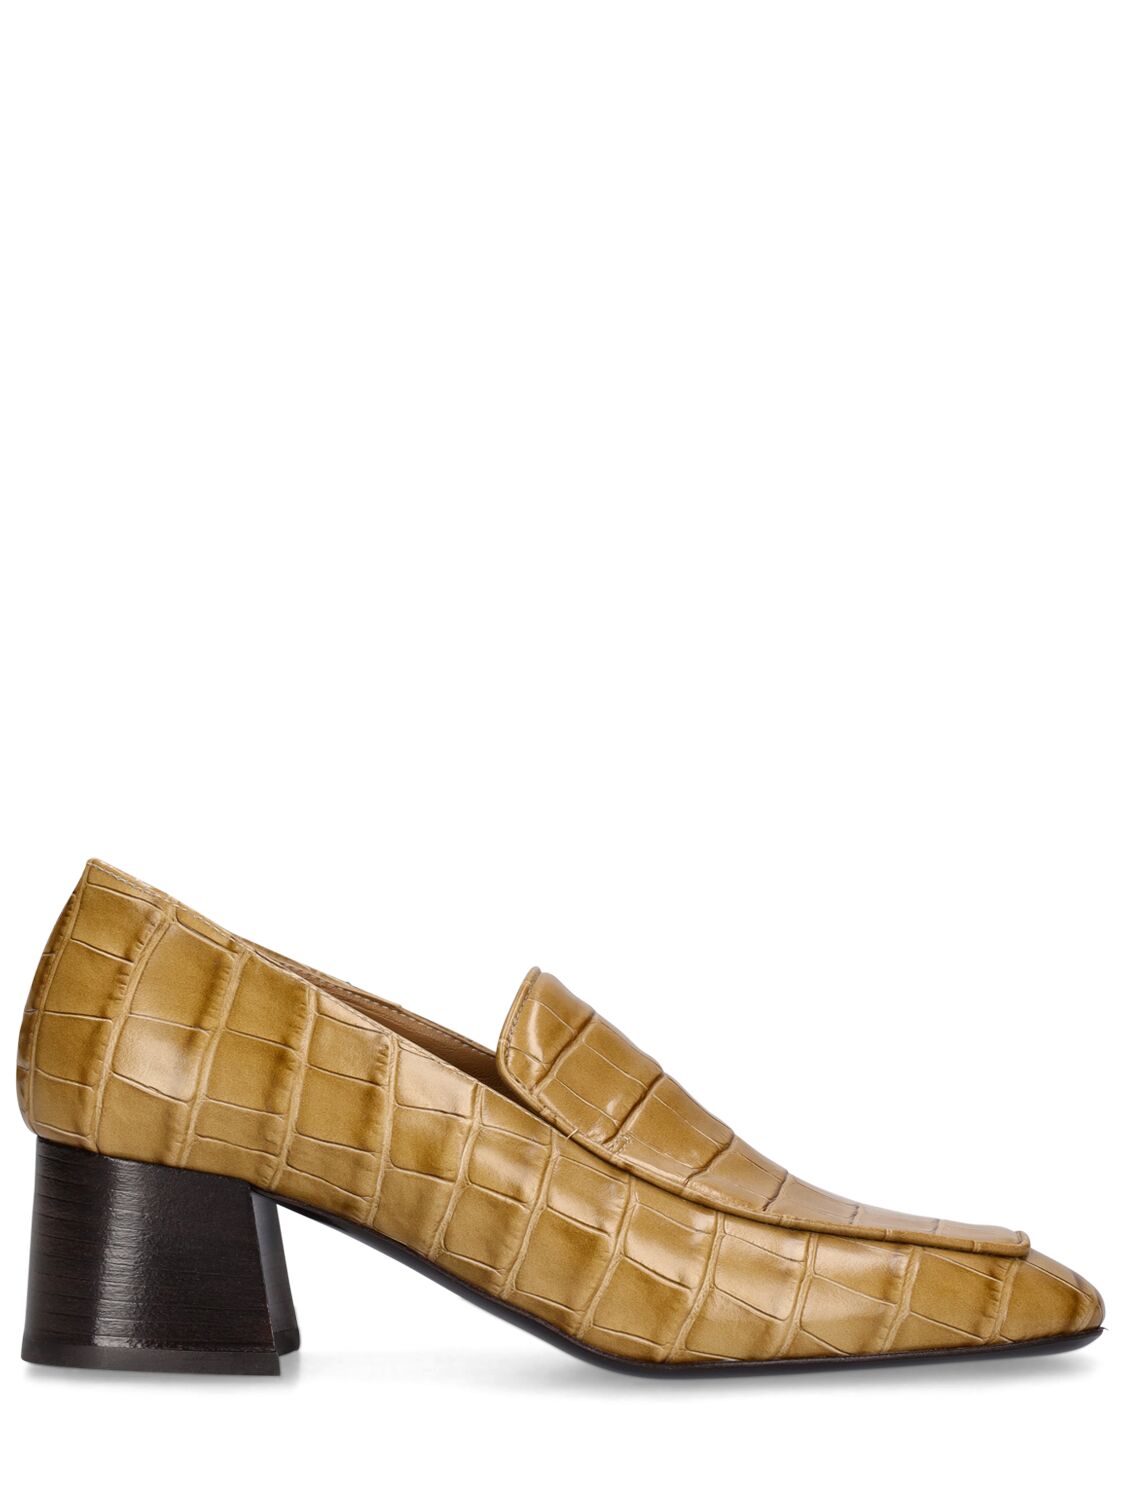 Image of The Block Heel Leather Pumps